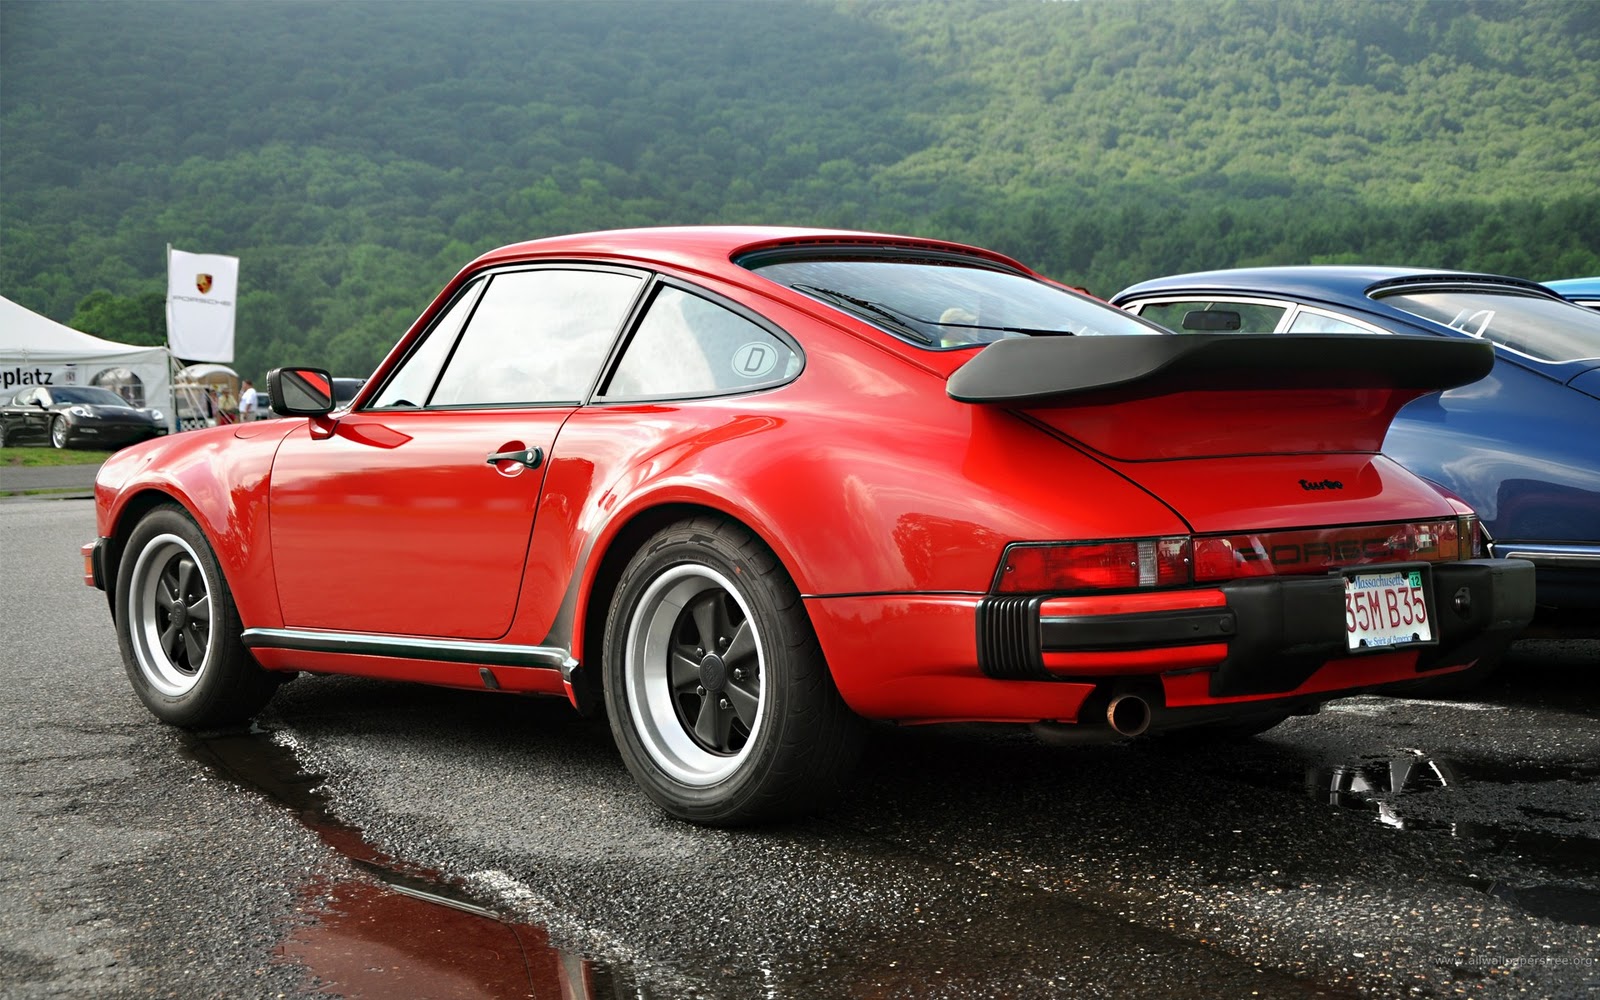 Classic Porsche 911 RS Carrera turbo wallpapers ~ The Wallpaper Database